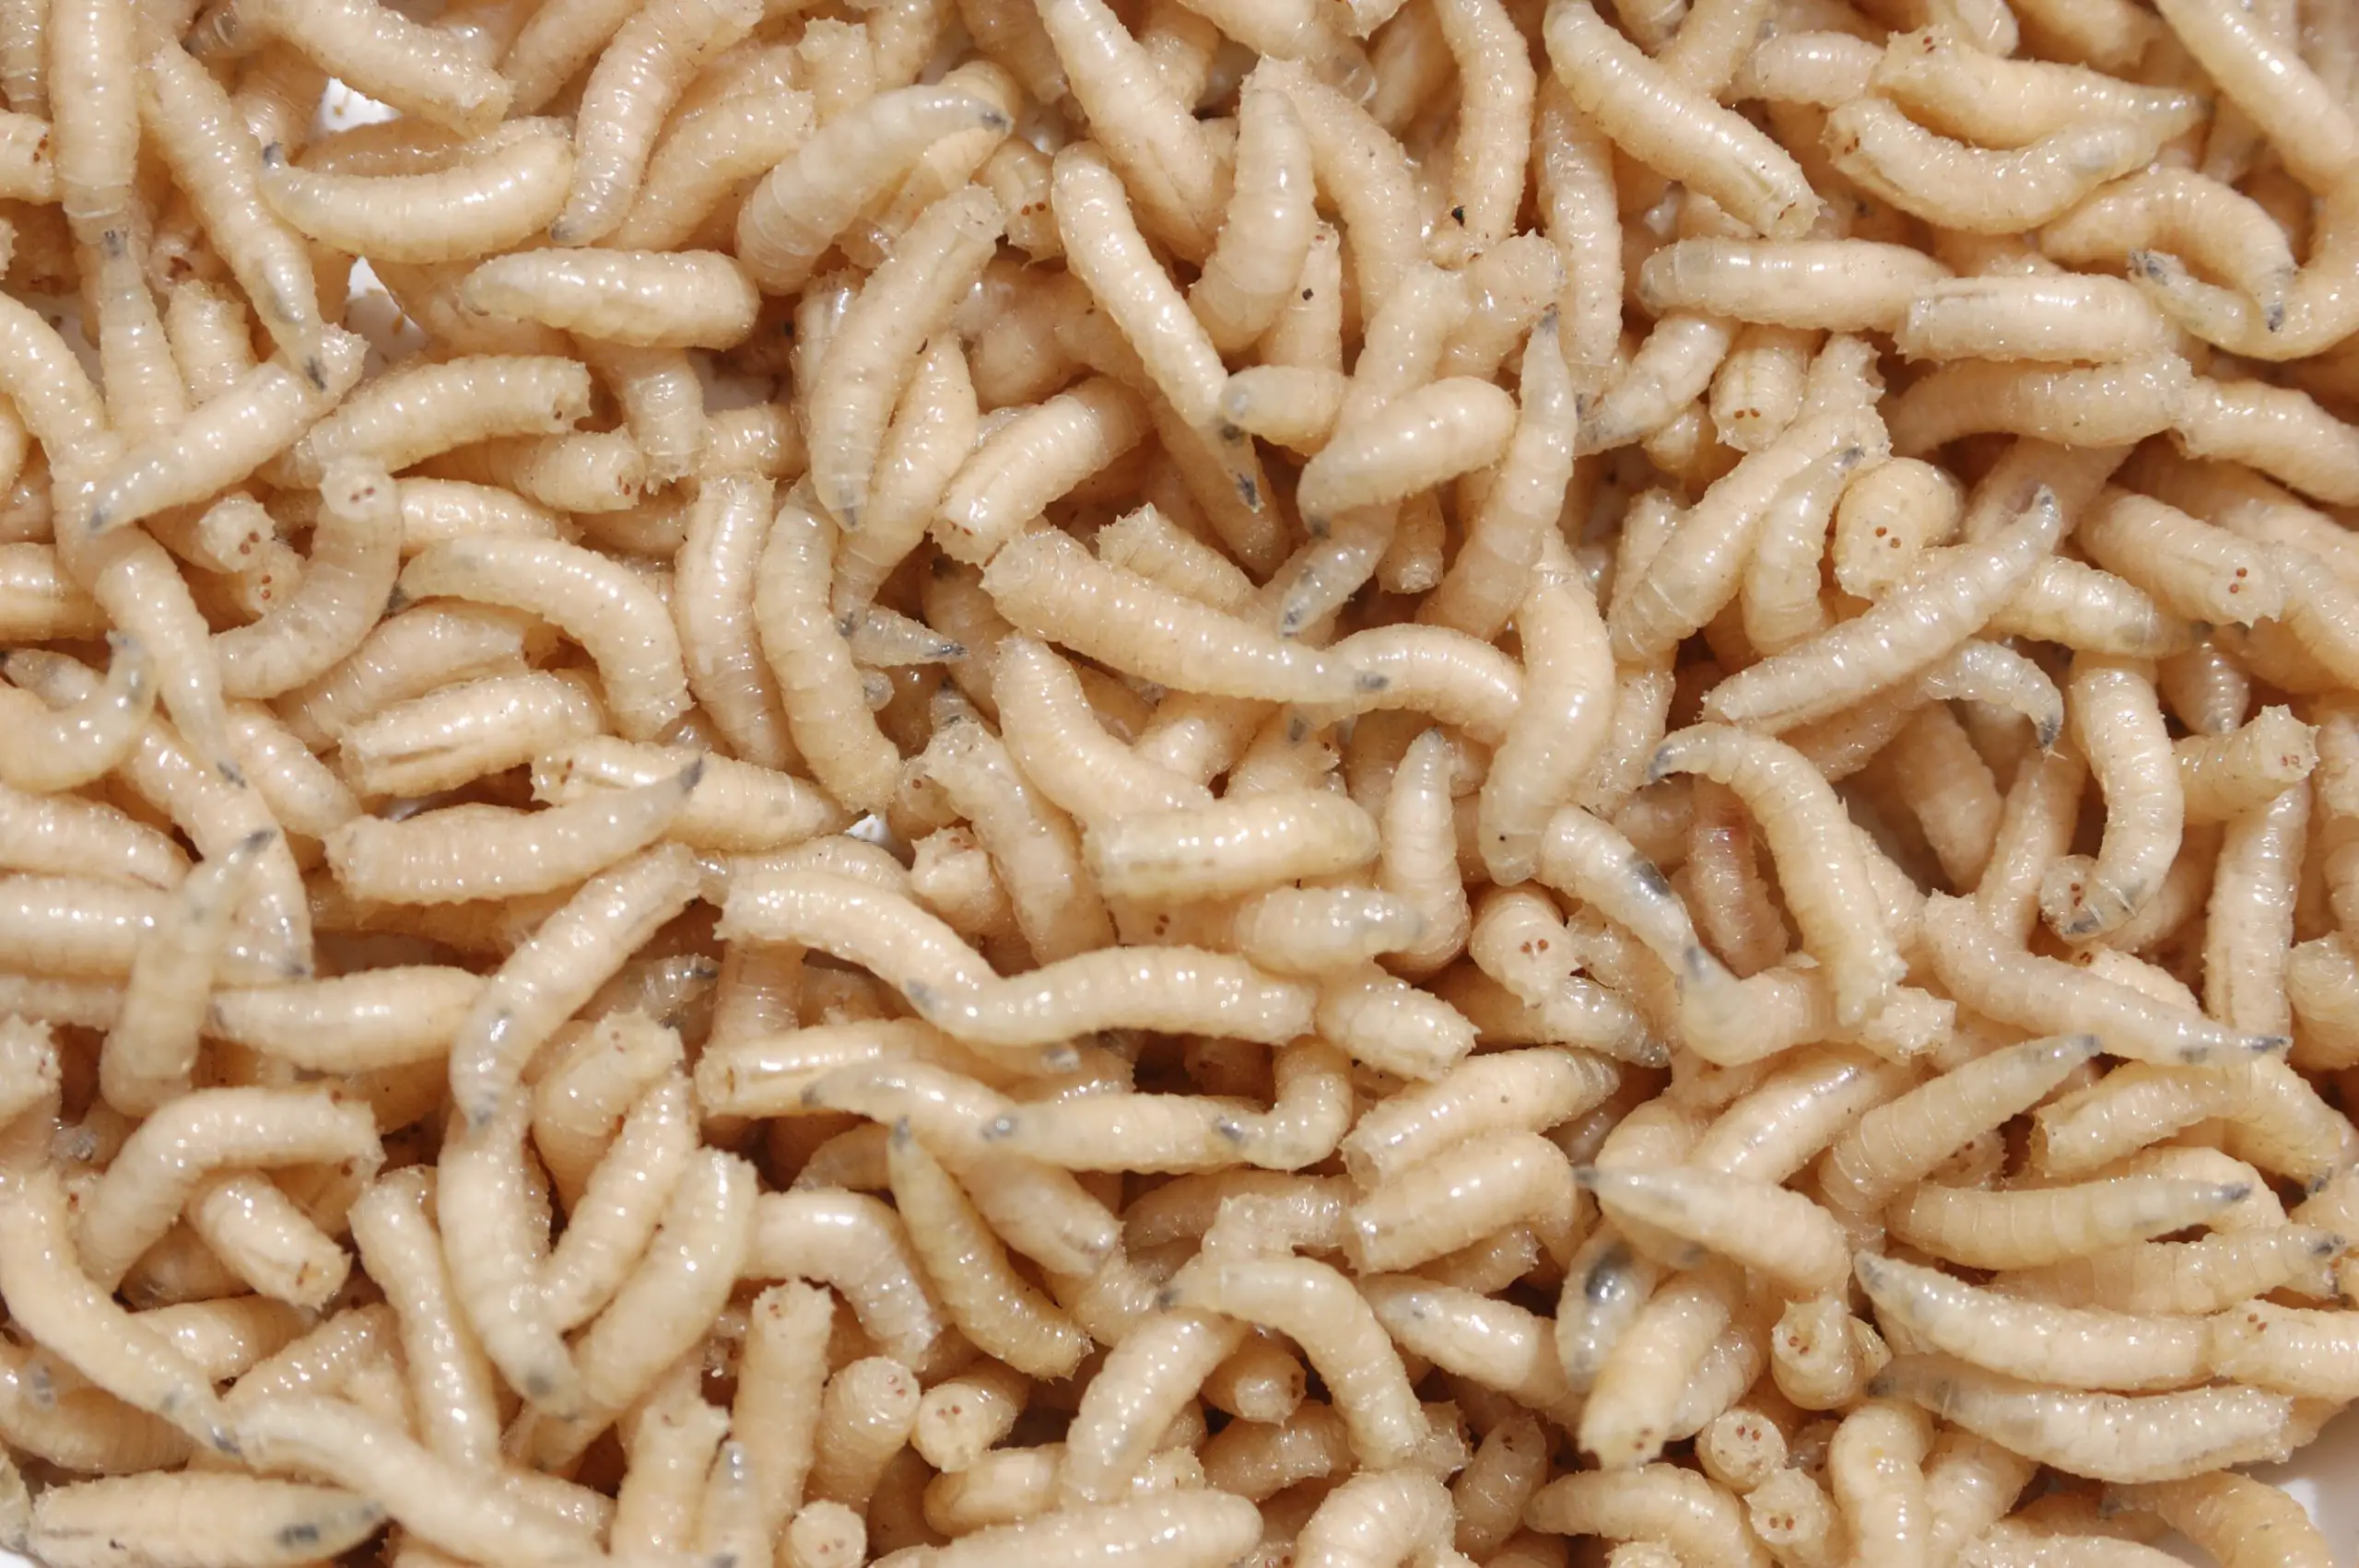 9 Intriguing Questions About Maggots